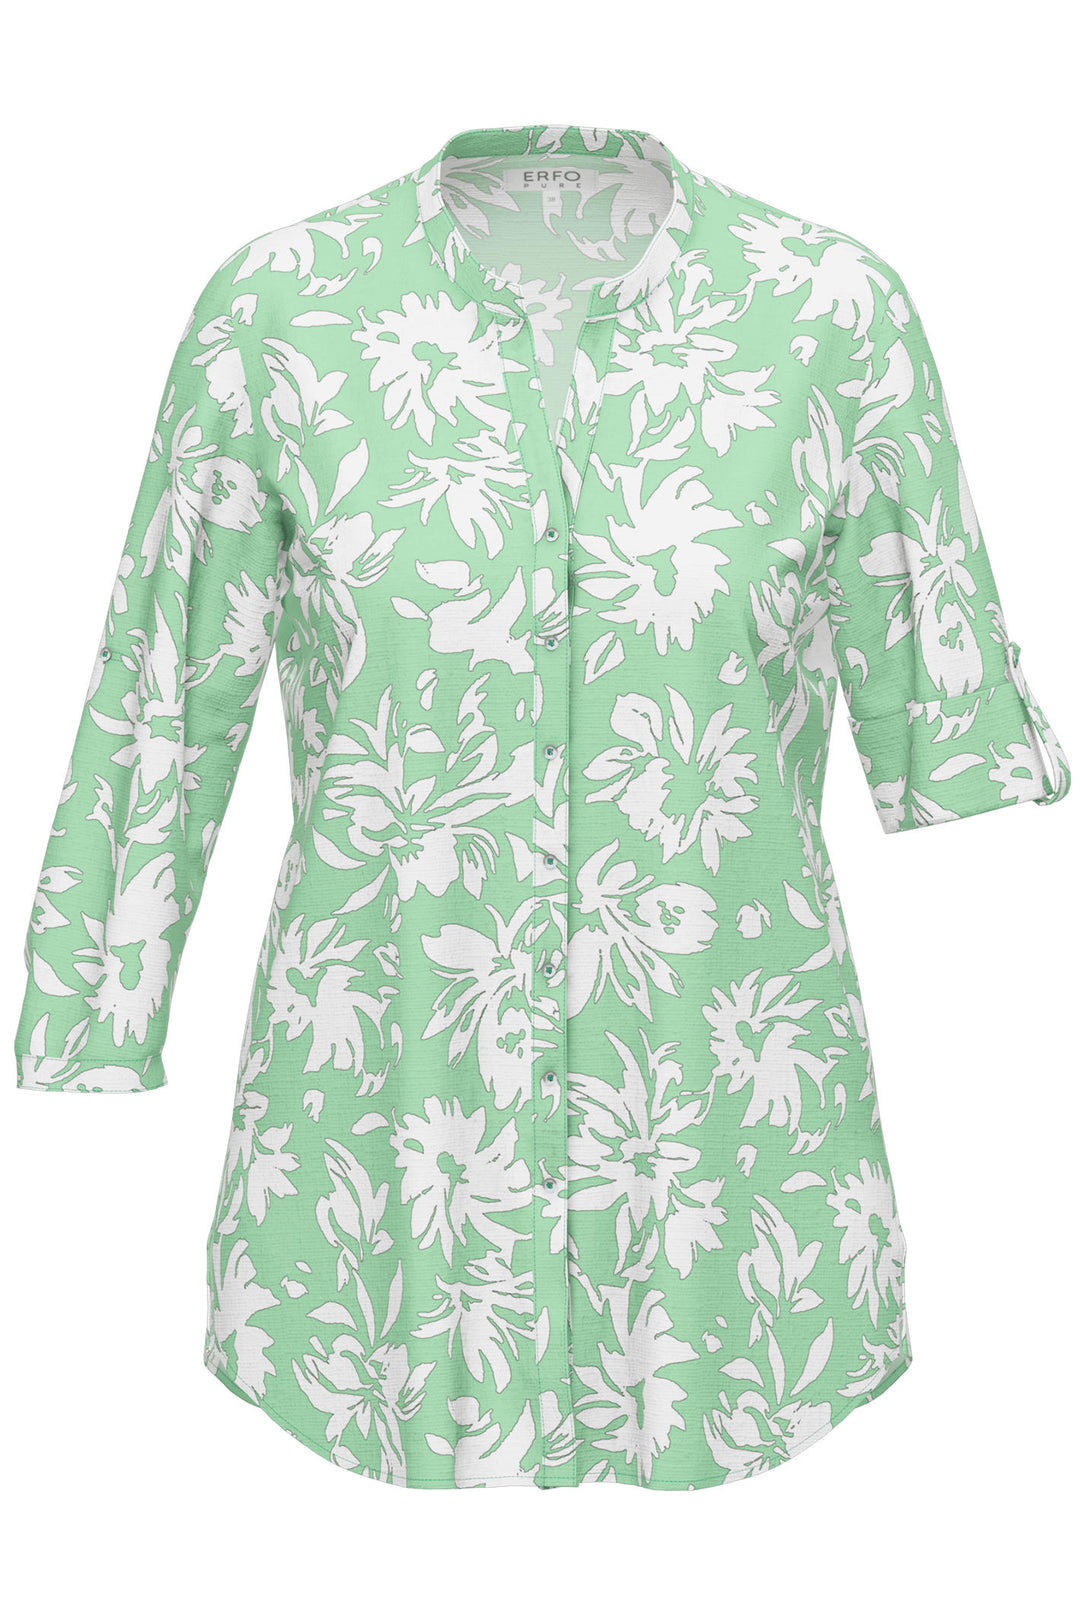 Erfo 8111021-00 Green Floral Print Collarless Blouse - Shirley Allum Boutique